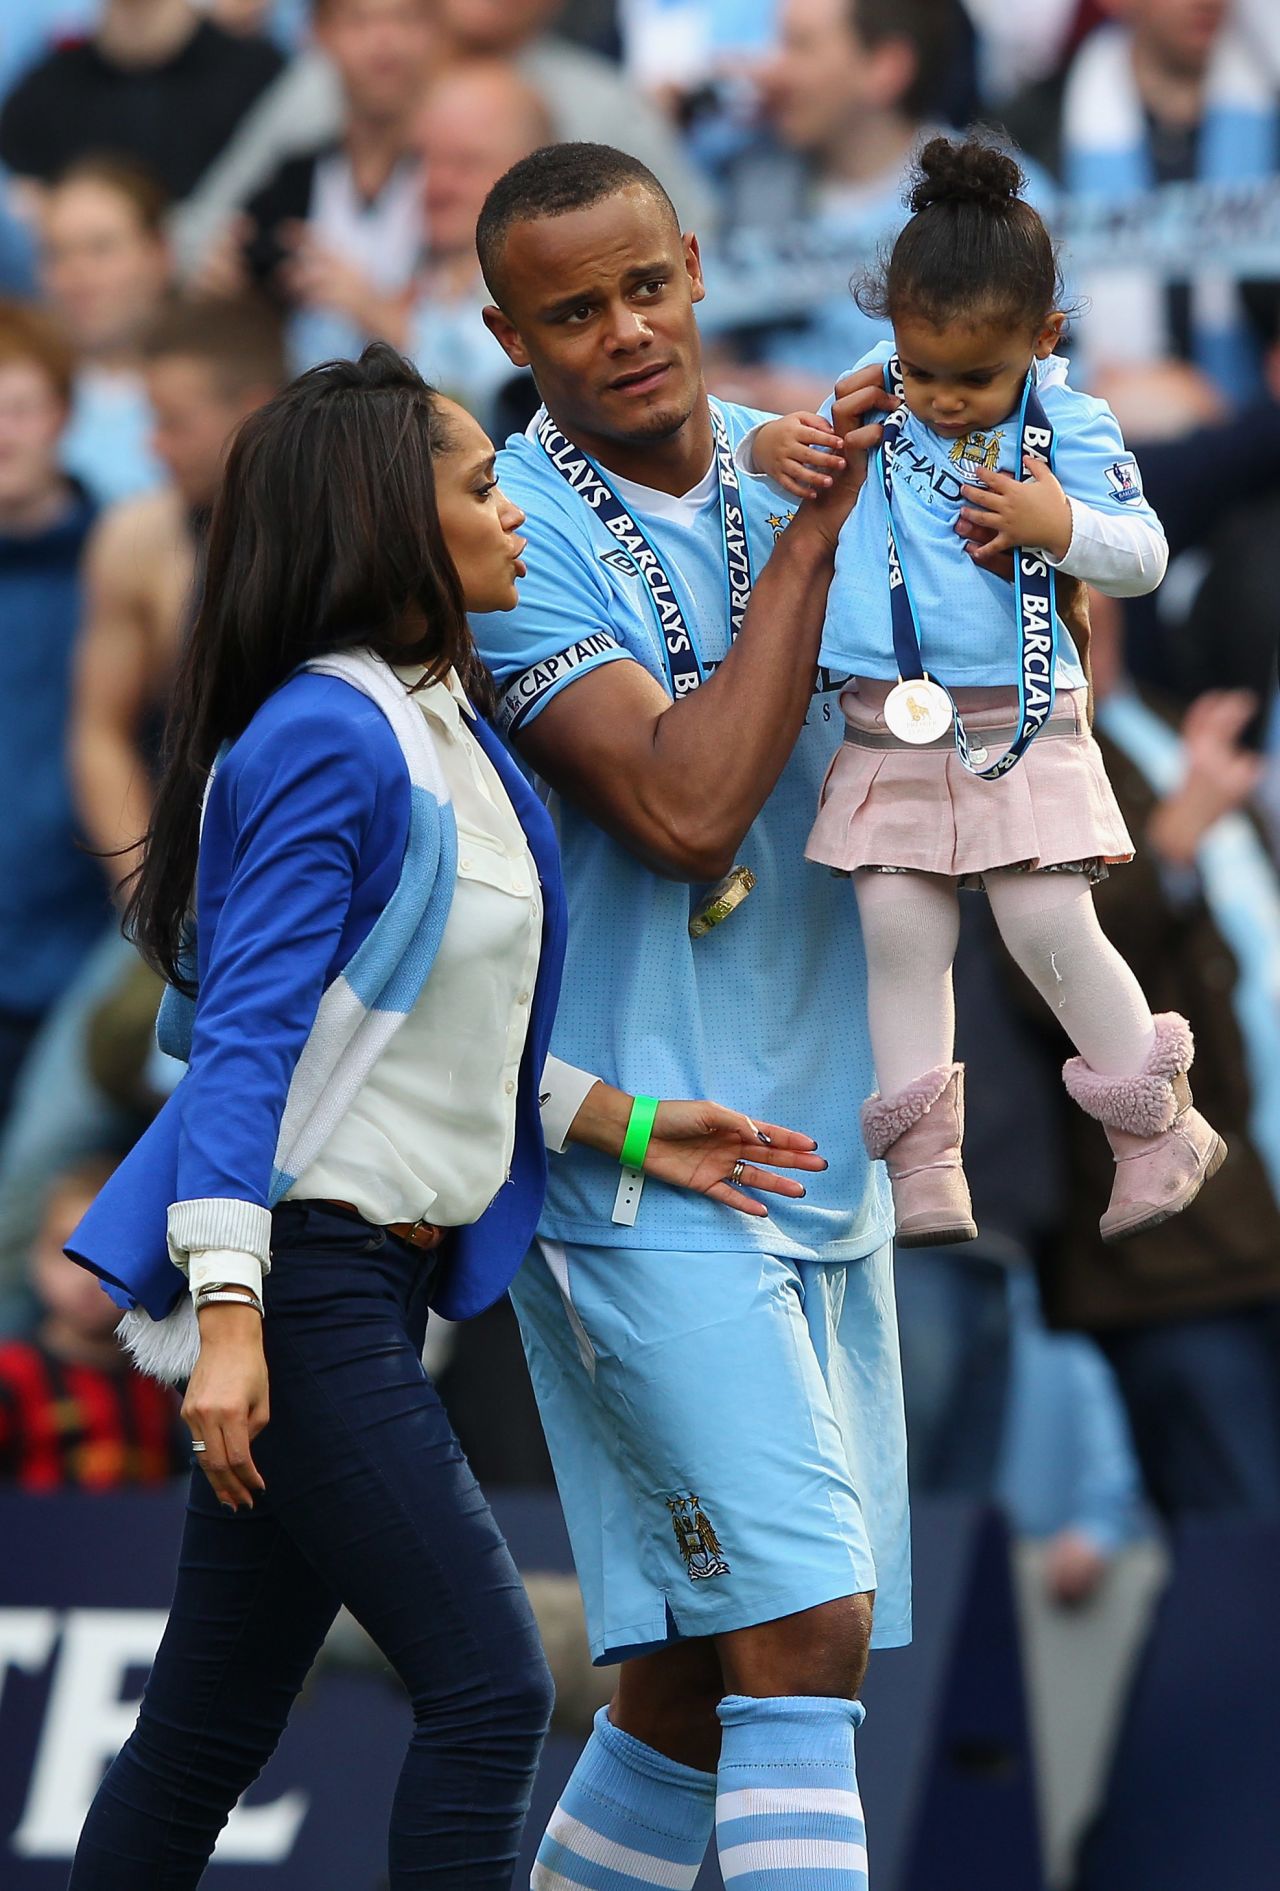 Kompany, who is married to Mancunian born Carla Higgs, has three children. He says he would have little problem in bringing them back to Brussels if he was ever to return to the city.